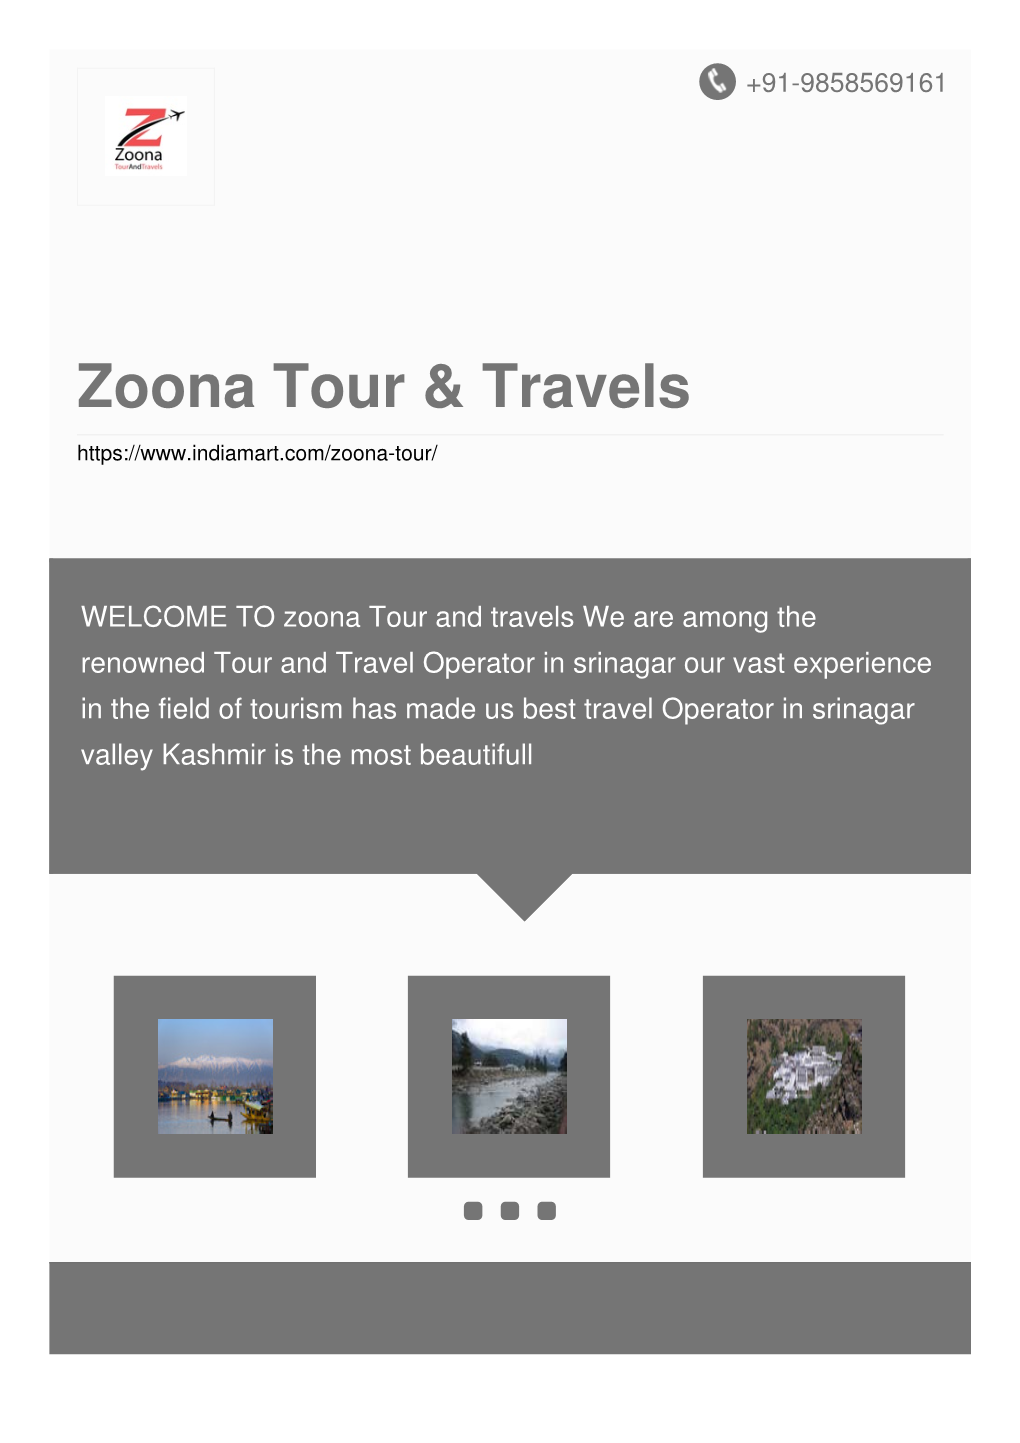 Zoona Tour & Travels